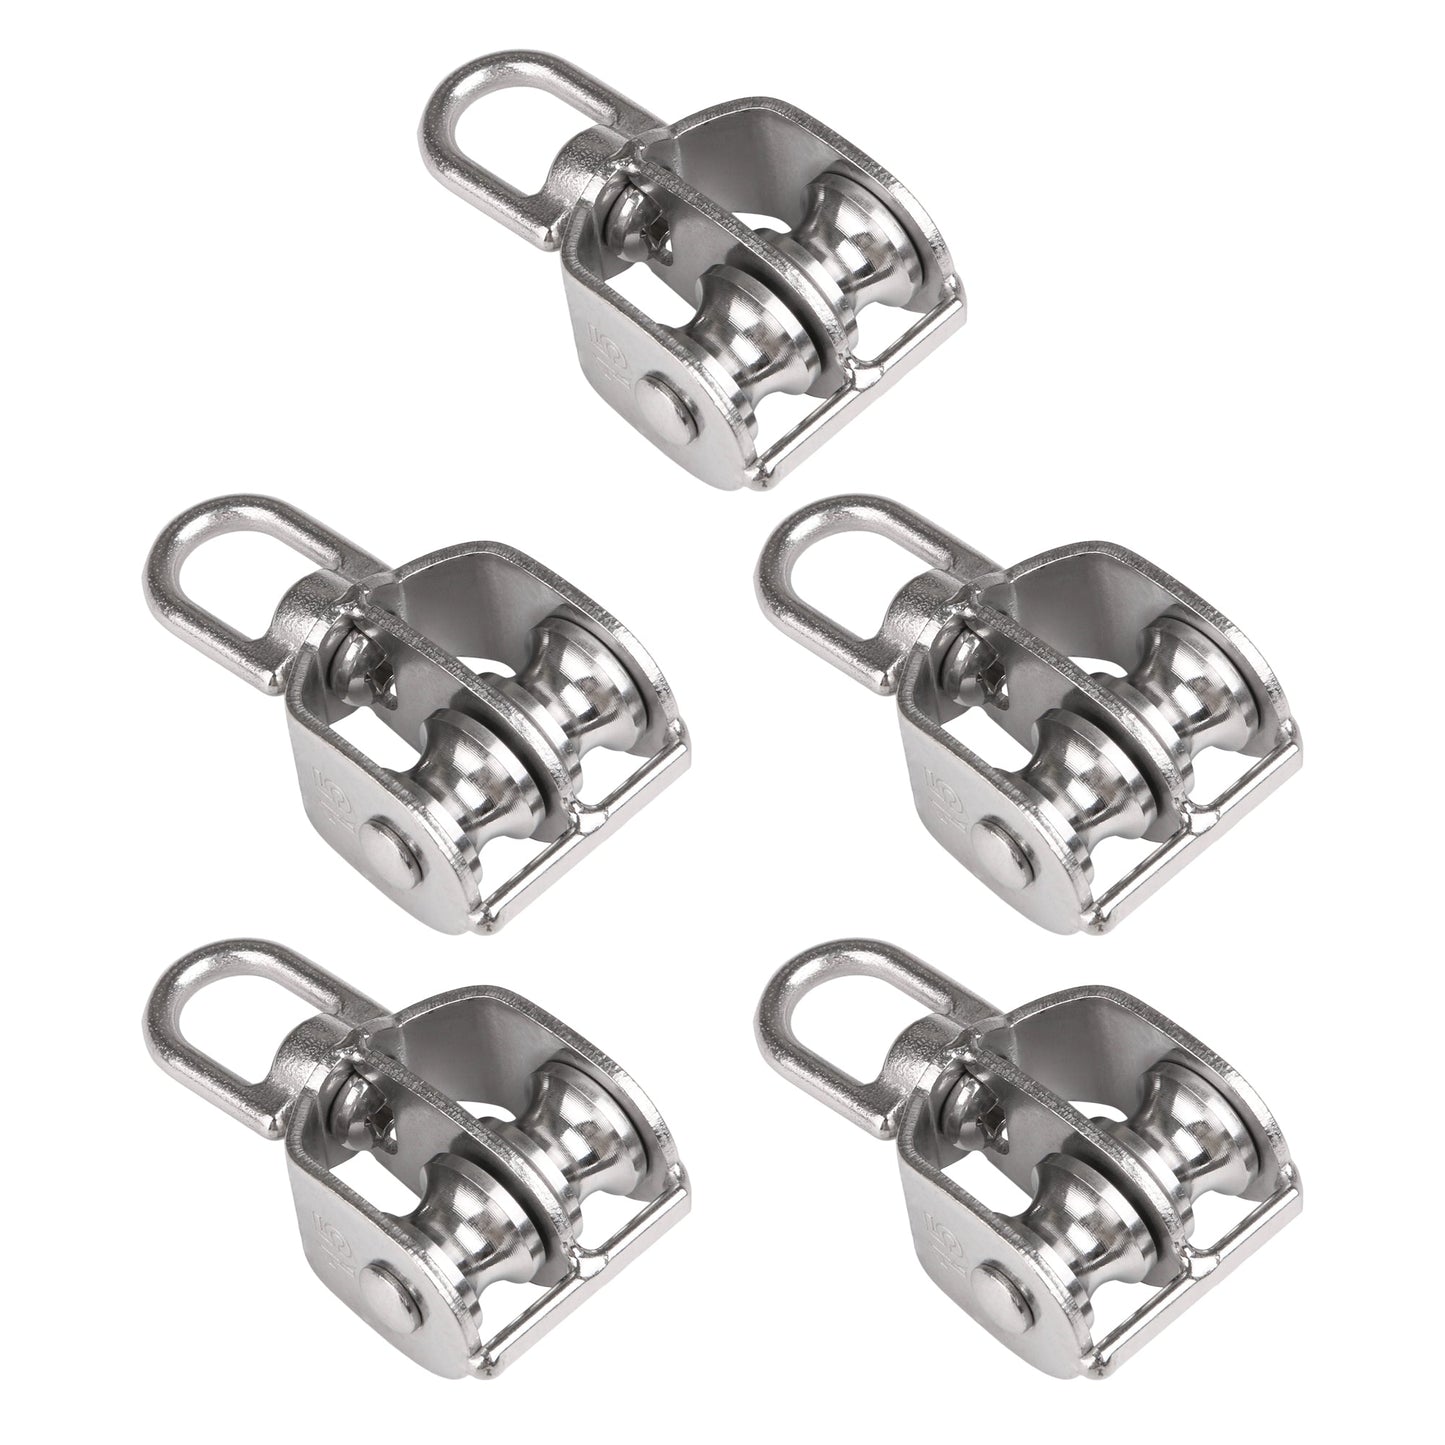 BQLZR Stainless Steel Double Pulley Block M15 Lifting Wheel 15mm Dia Silver Pack of 5